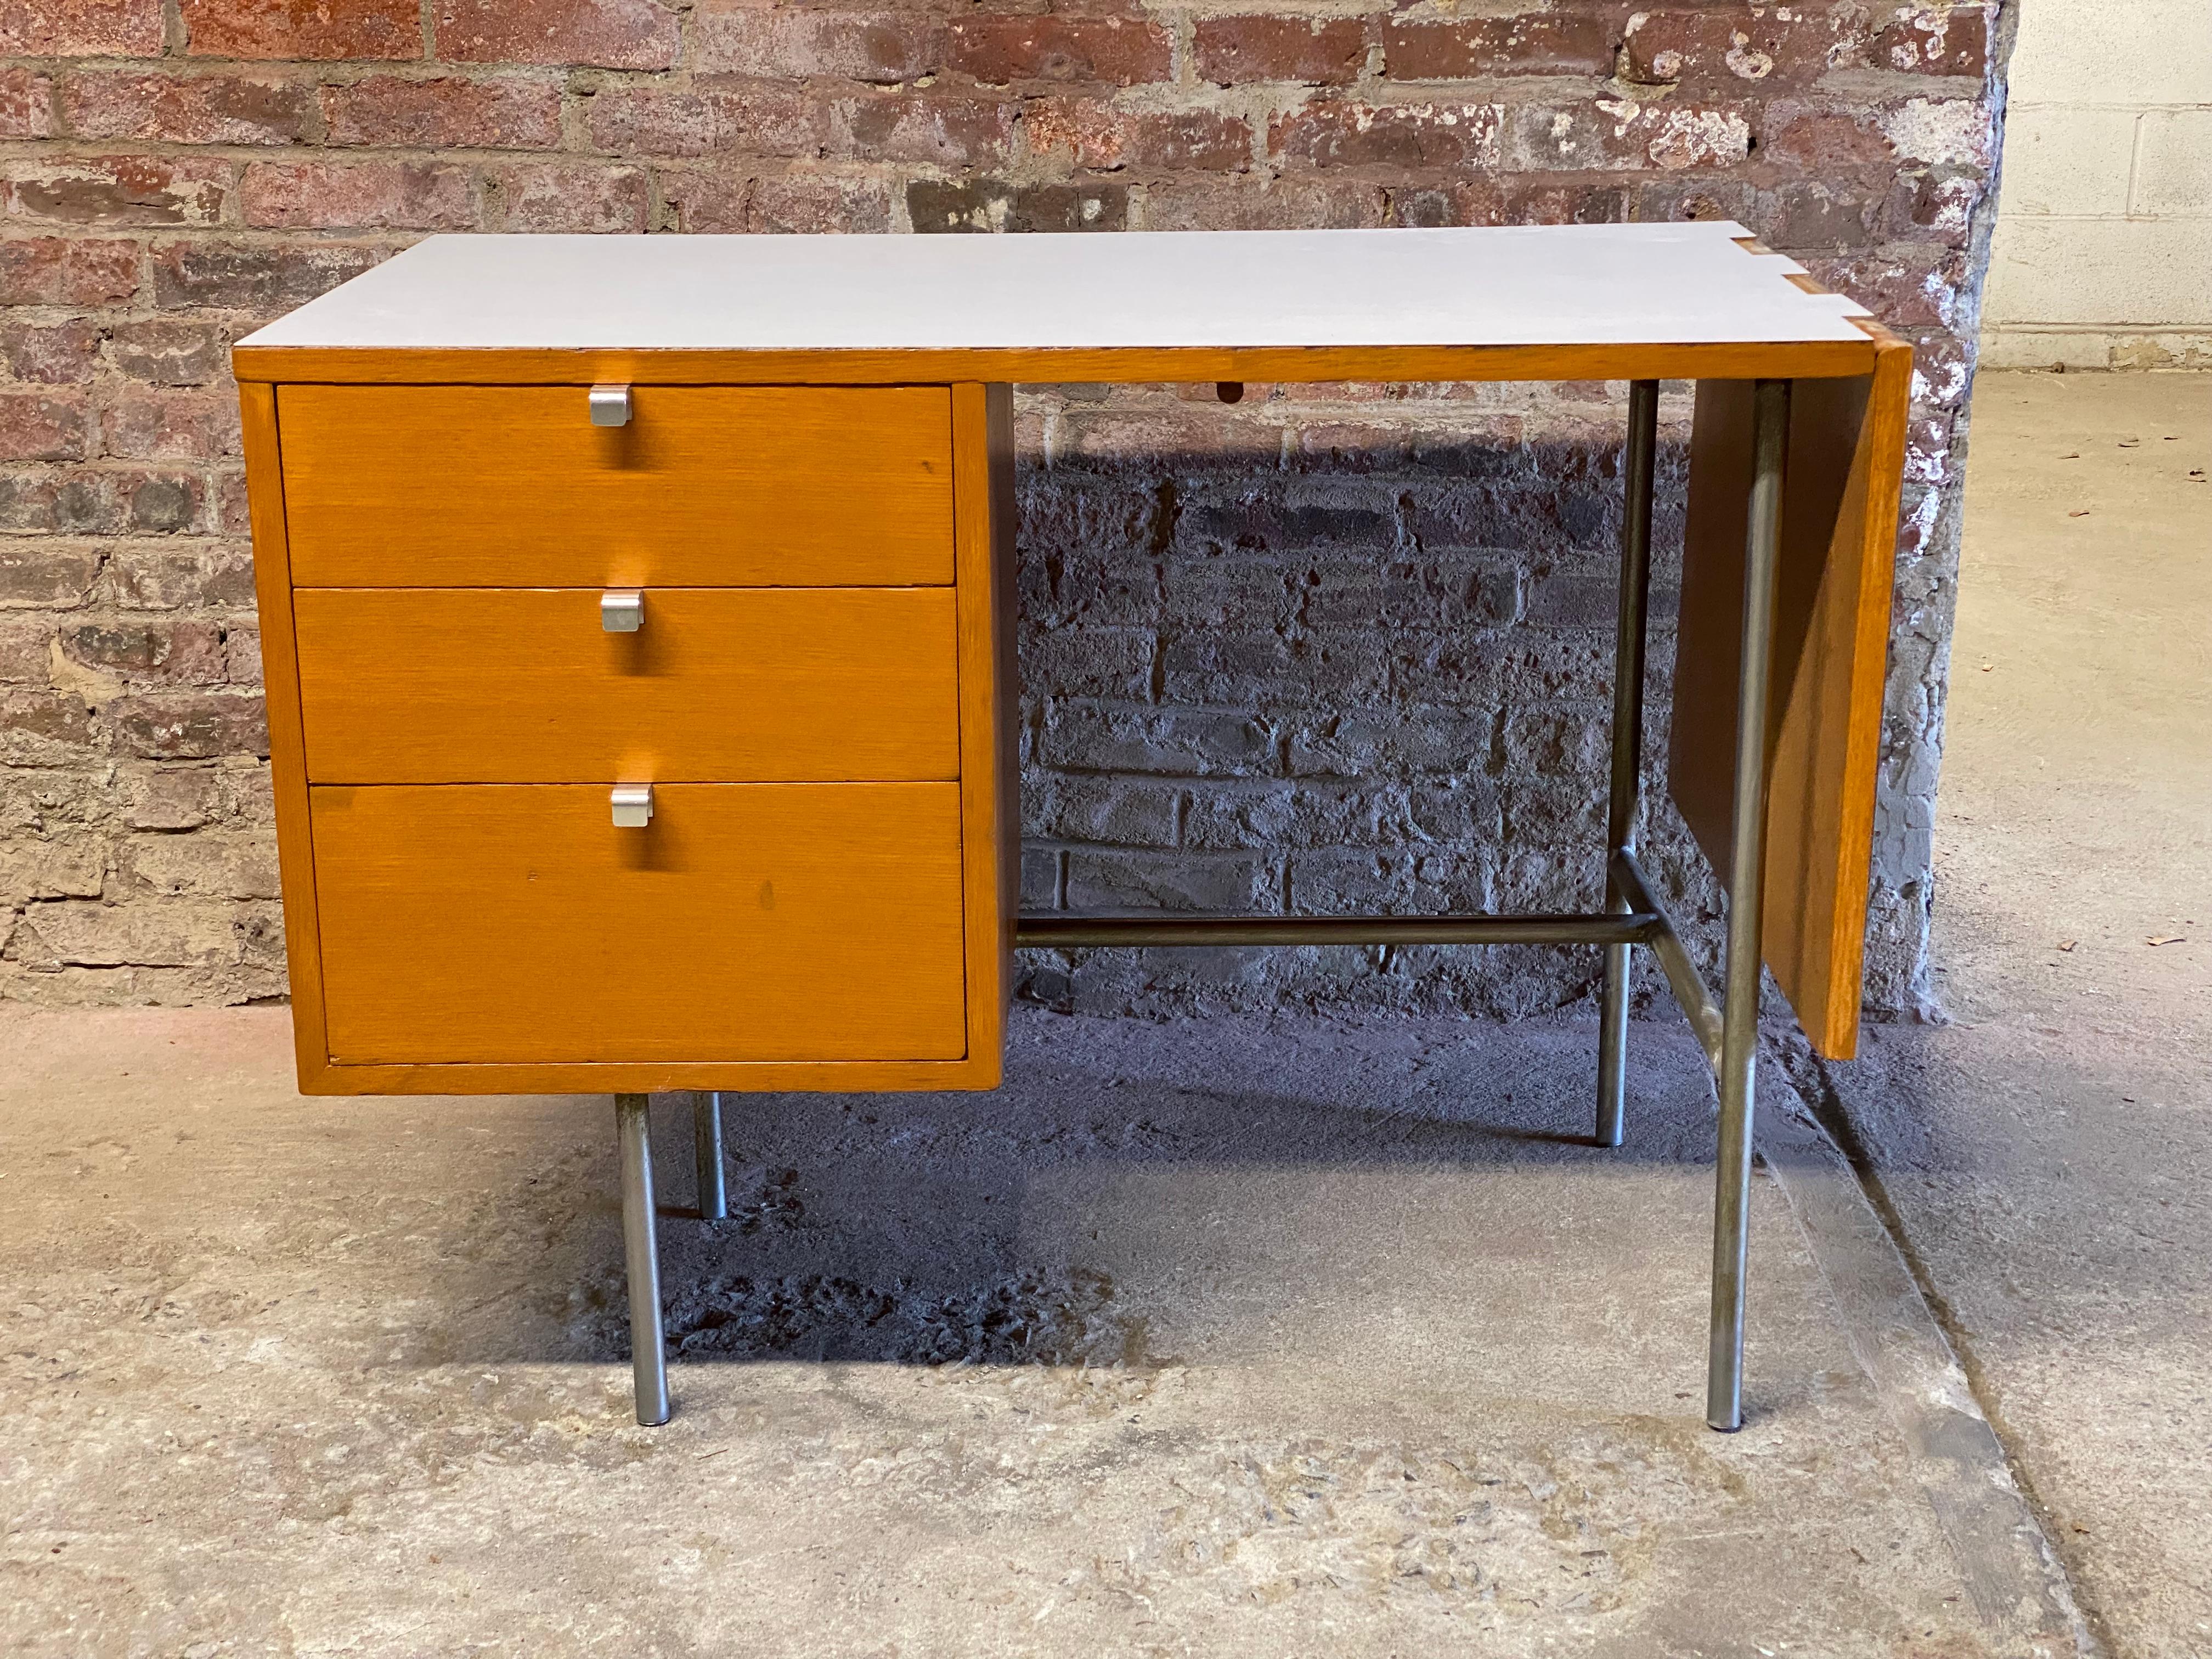 Nice early George Nelson's design for Herman Miller. Oak, aluminum and white laminate top. Three deep drawers. Chrome 'J' pulls. The top drawer pull has the early HM stamp. The side leaf extends with sliding support from underneath to make a larger